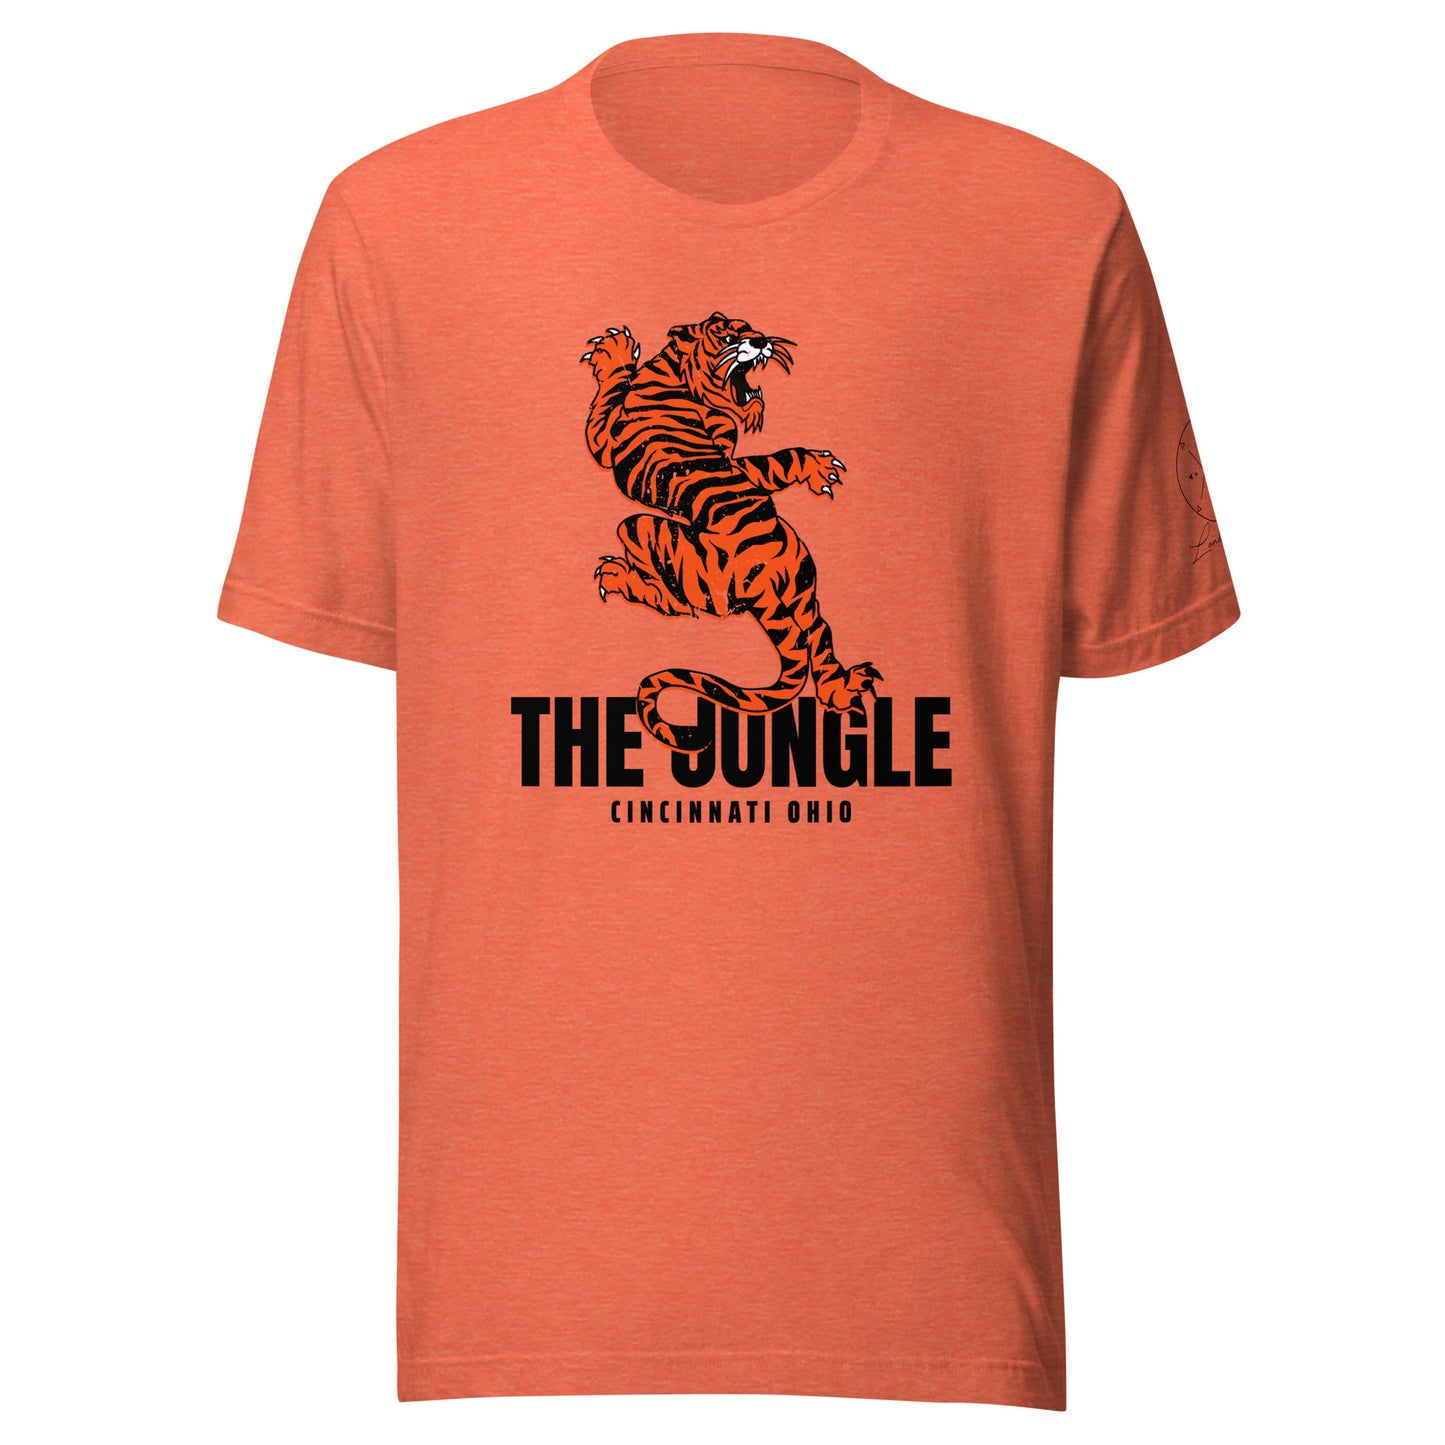 The Jungle New Collection Unisex t-shirt